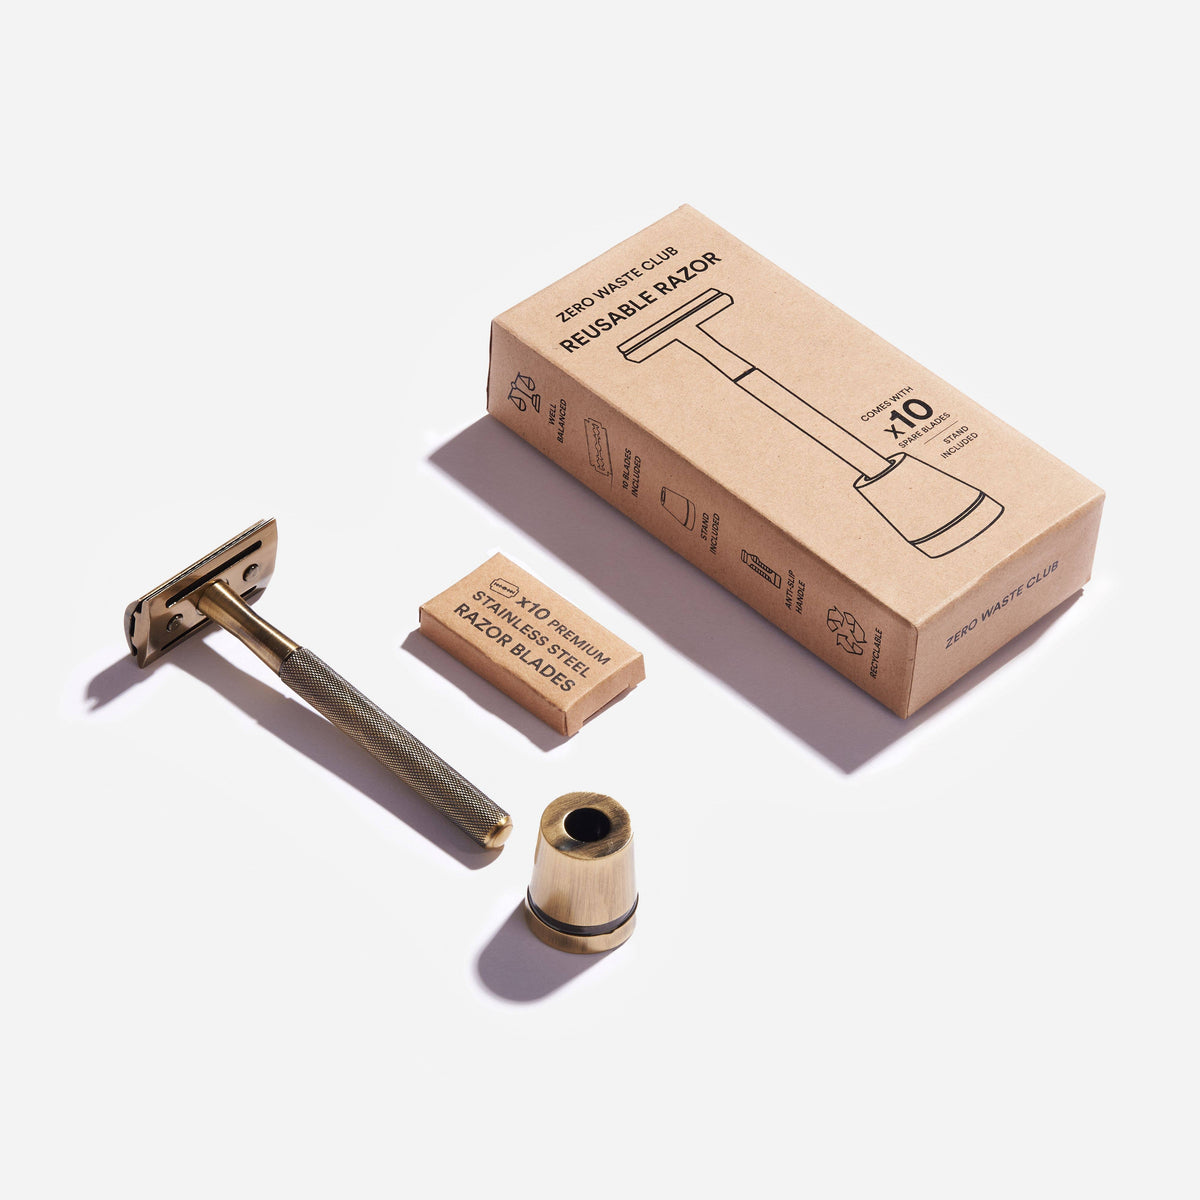 Zero Waste Club - Reusable Safety Razor with Stand - 10 Blades Included: Blush Wine